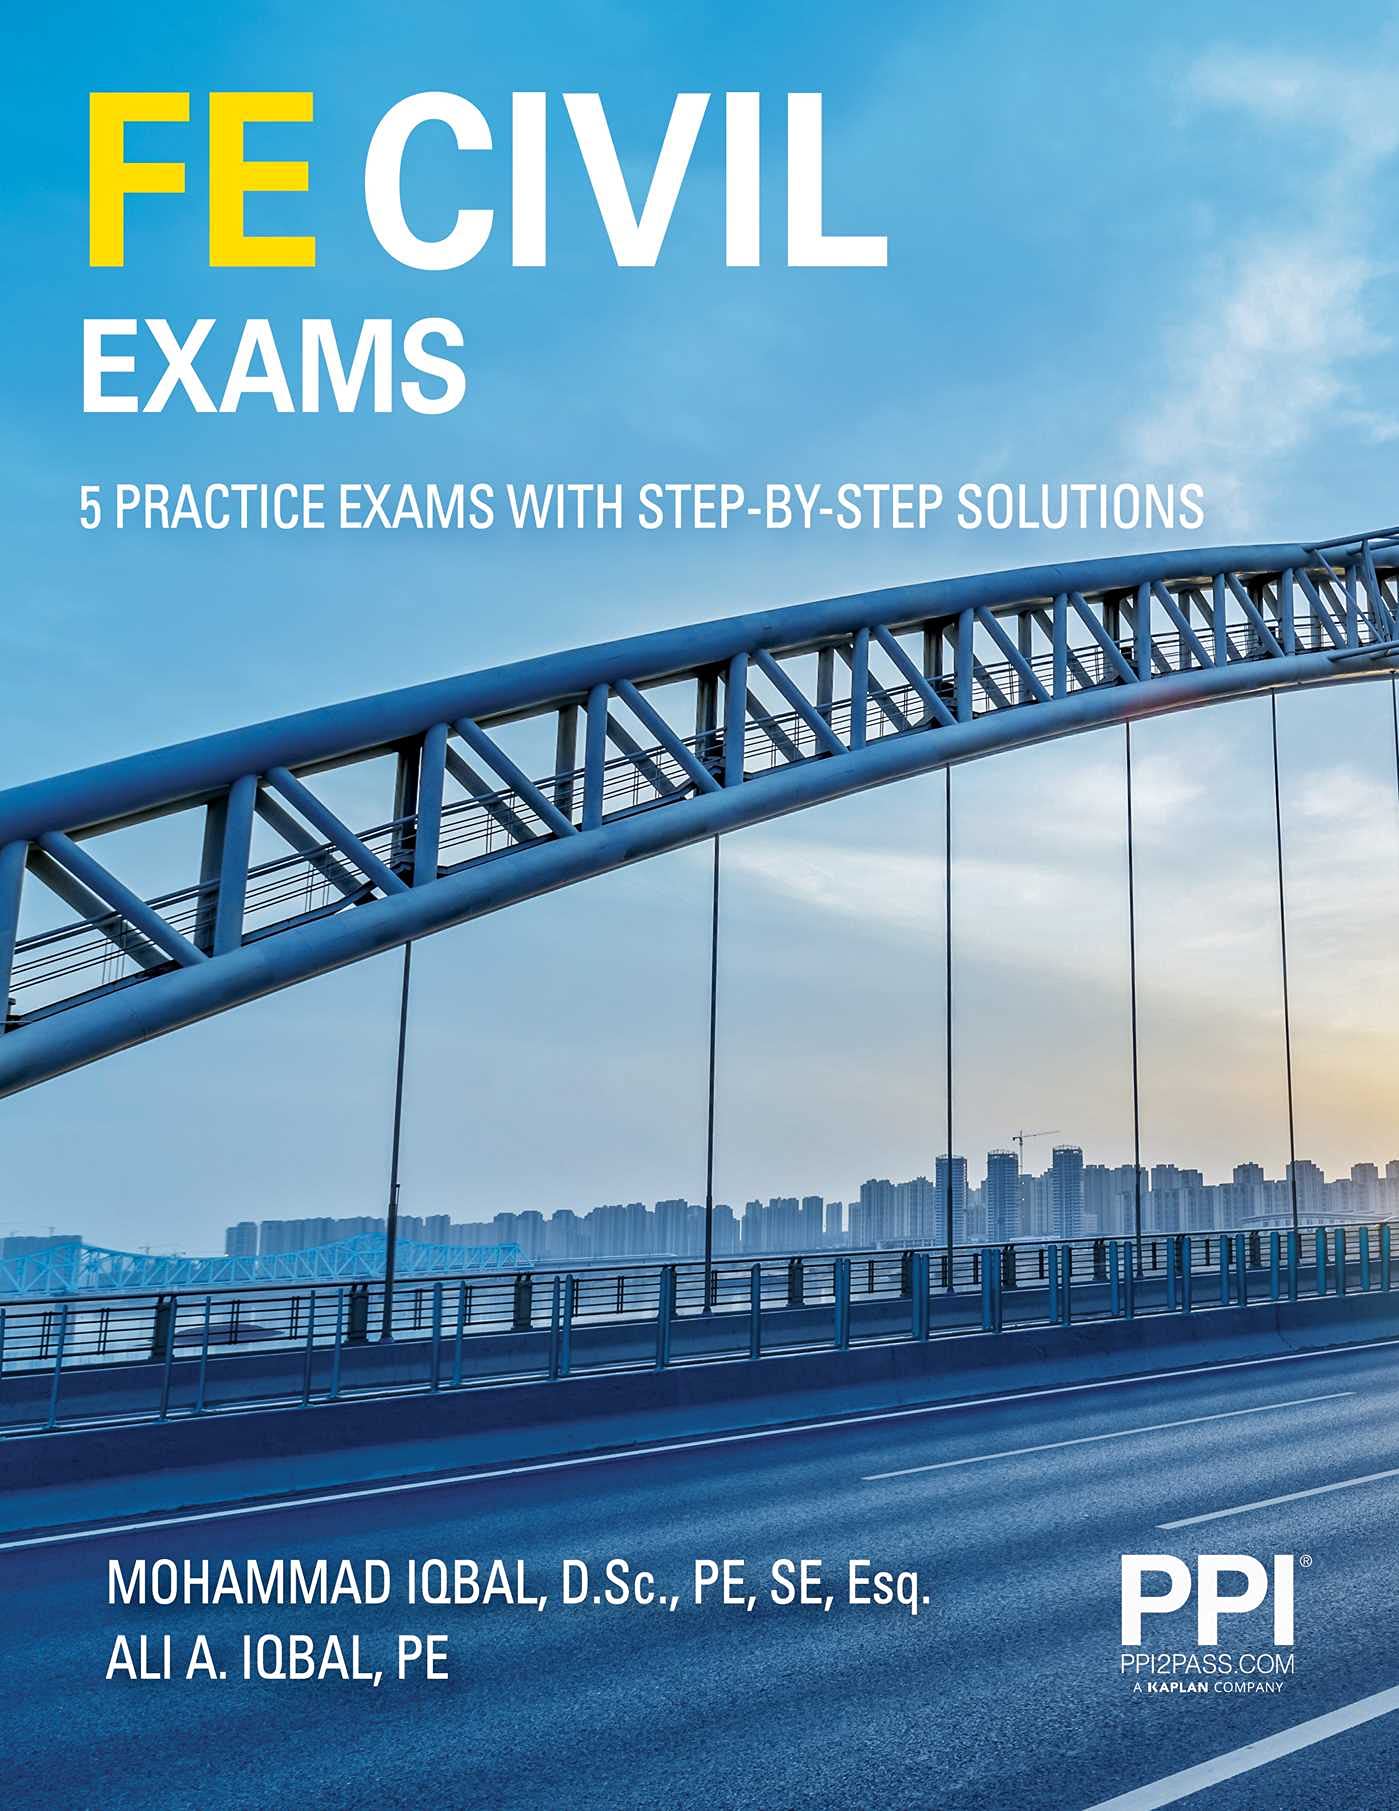 PPI FE Civil Exams—Five Full Practice Exams With Step-By-Step Solutions